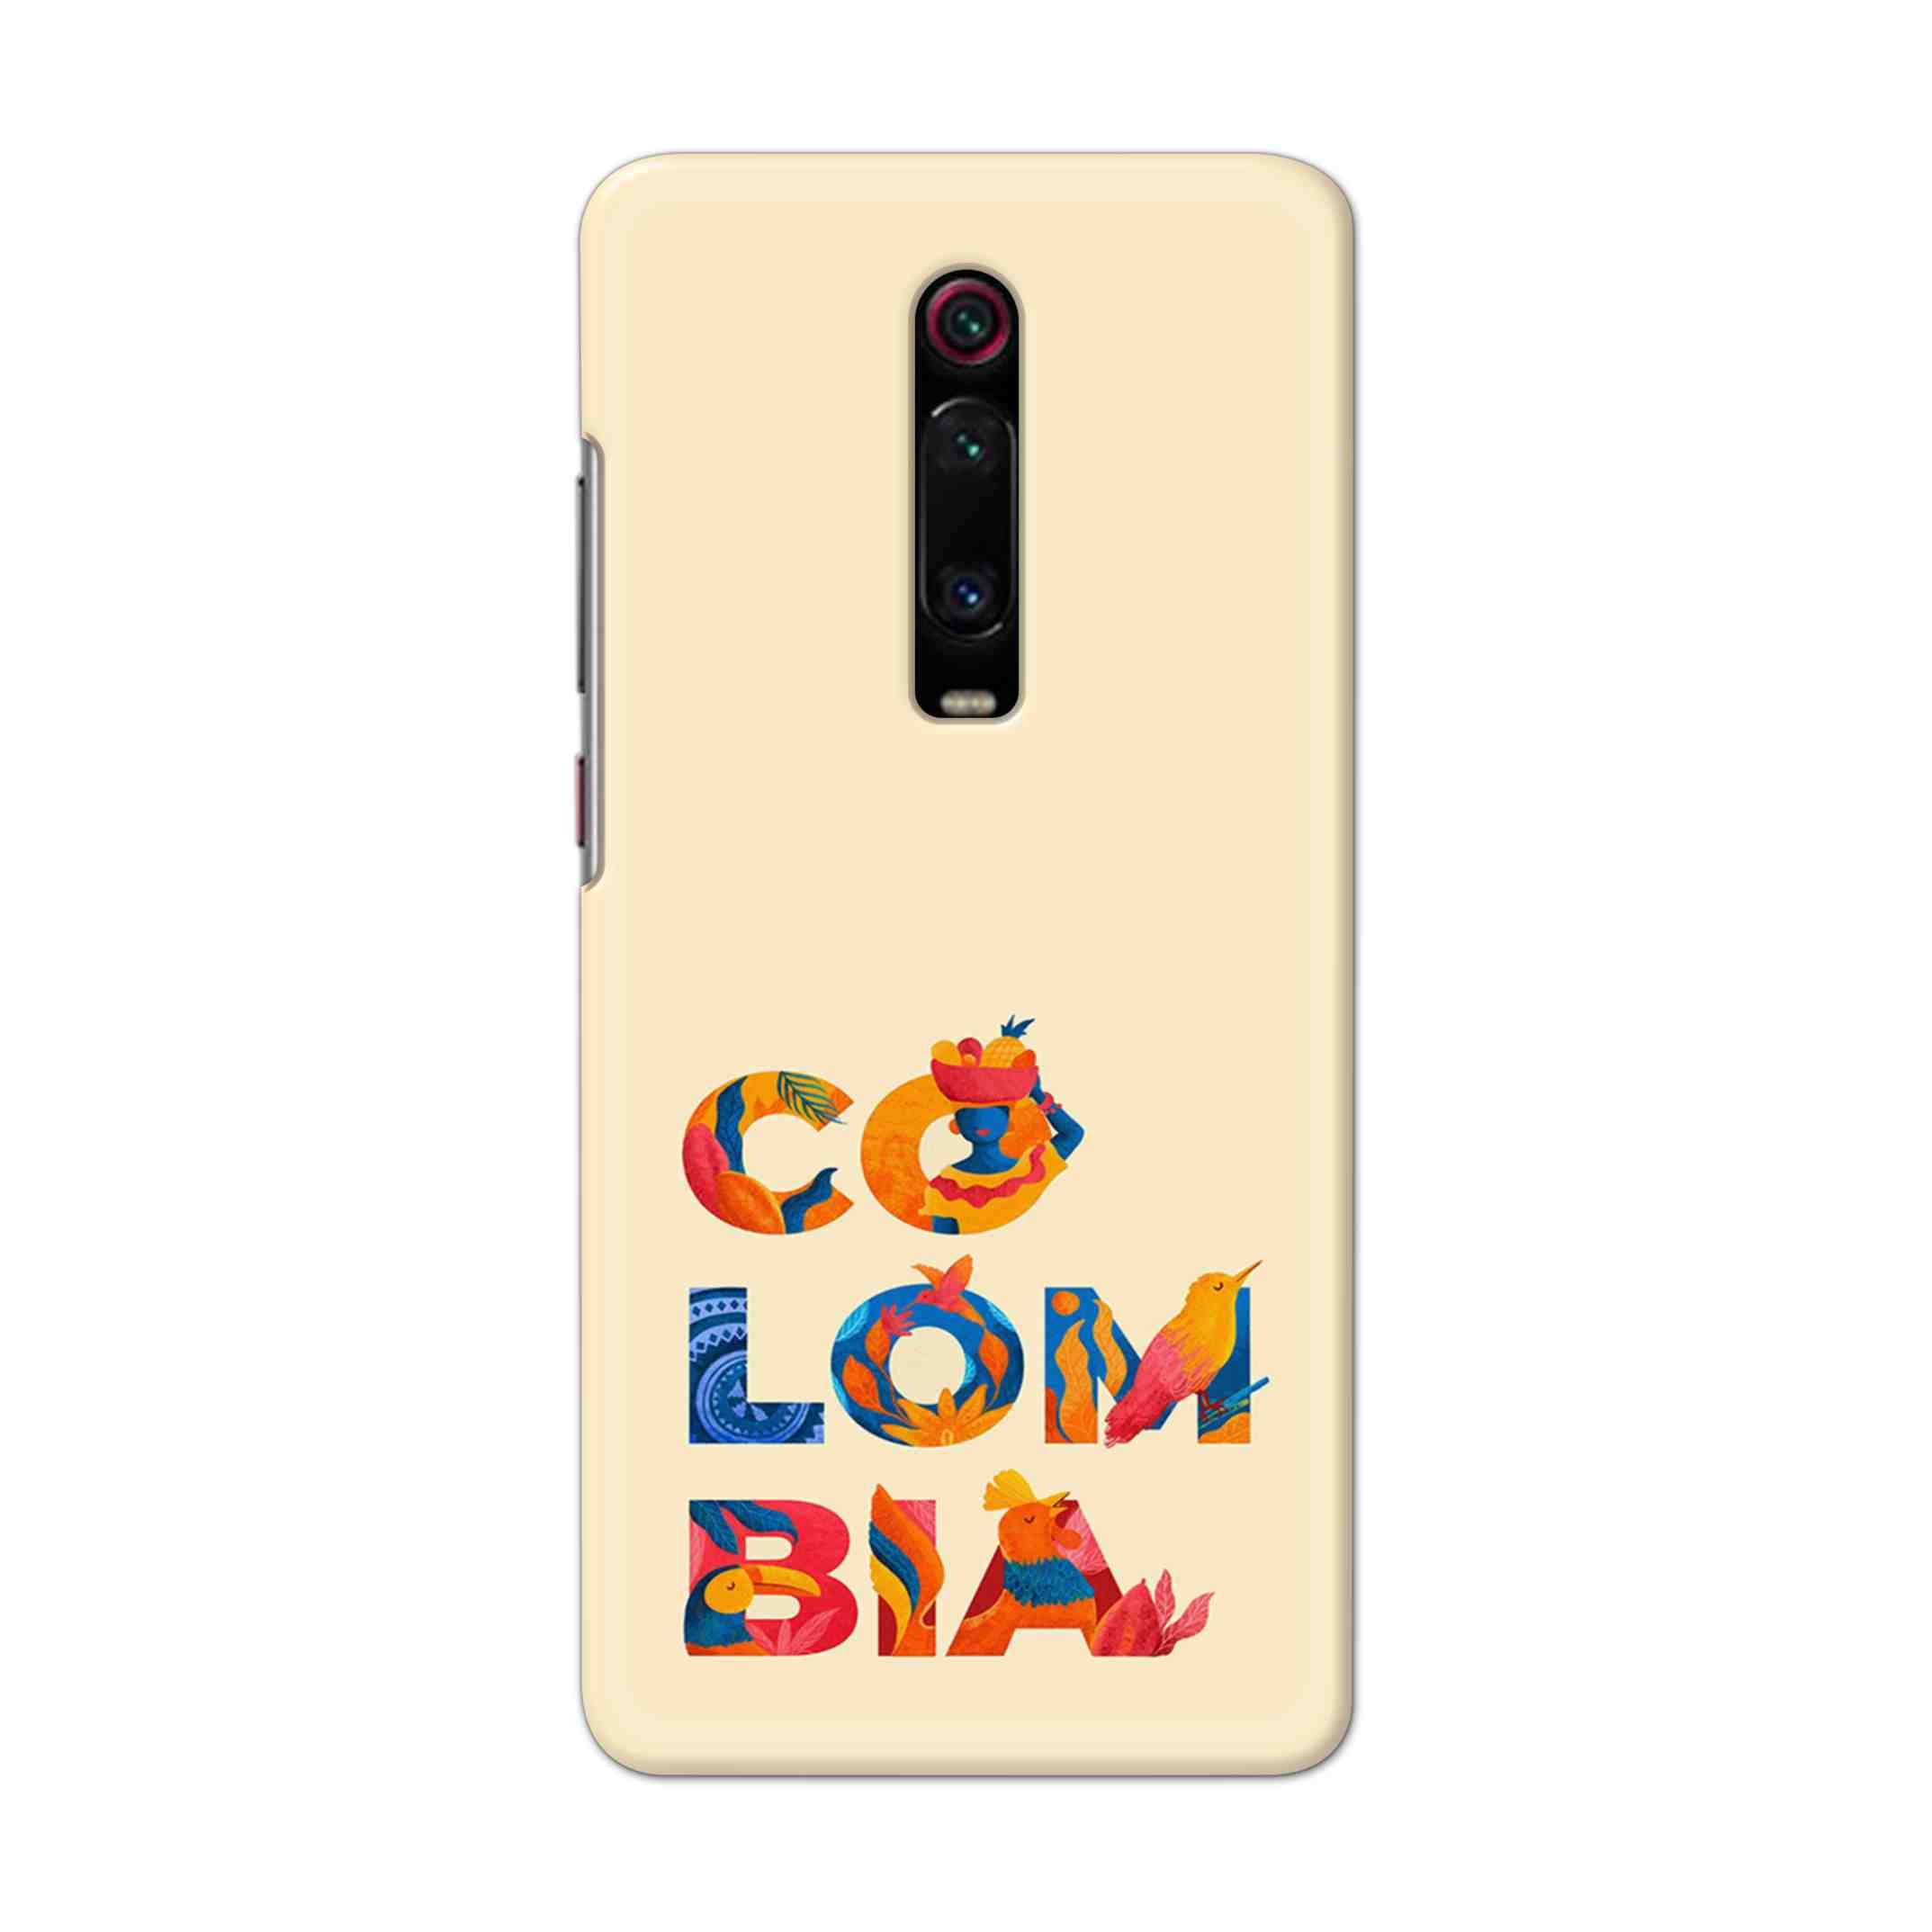 Buy Colombia Hard Back Mobile Phone Case Cover For Xiaomi Redmi K20 Online